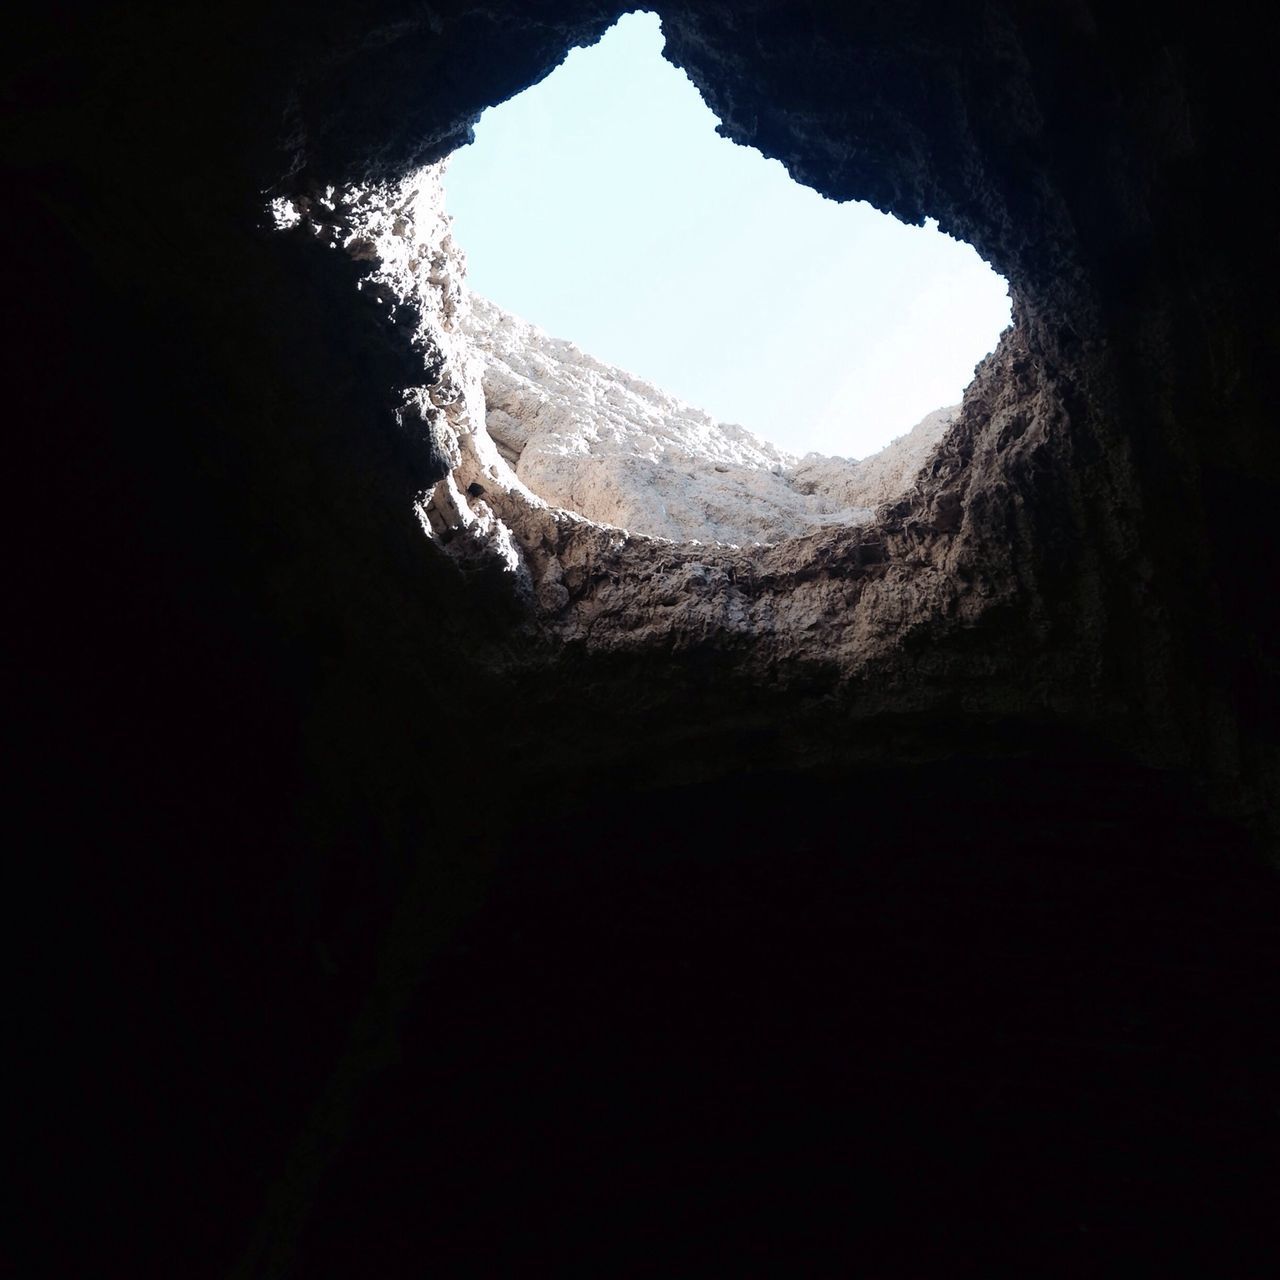 low angle view, tranquility, cave, nature, mountain, clear sky, dark, copy space, beauty in nature, silhouette, indoors, sky, tree, rock formation, scenics, rock - object, tranquil scene, close-up, no people, geology